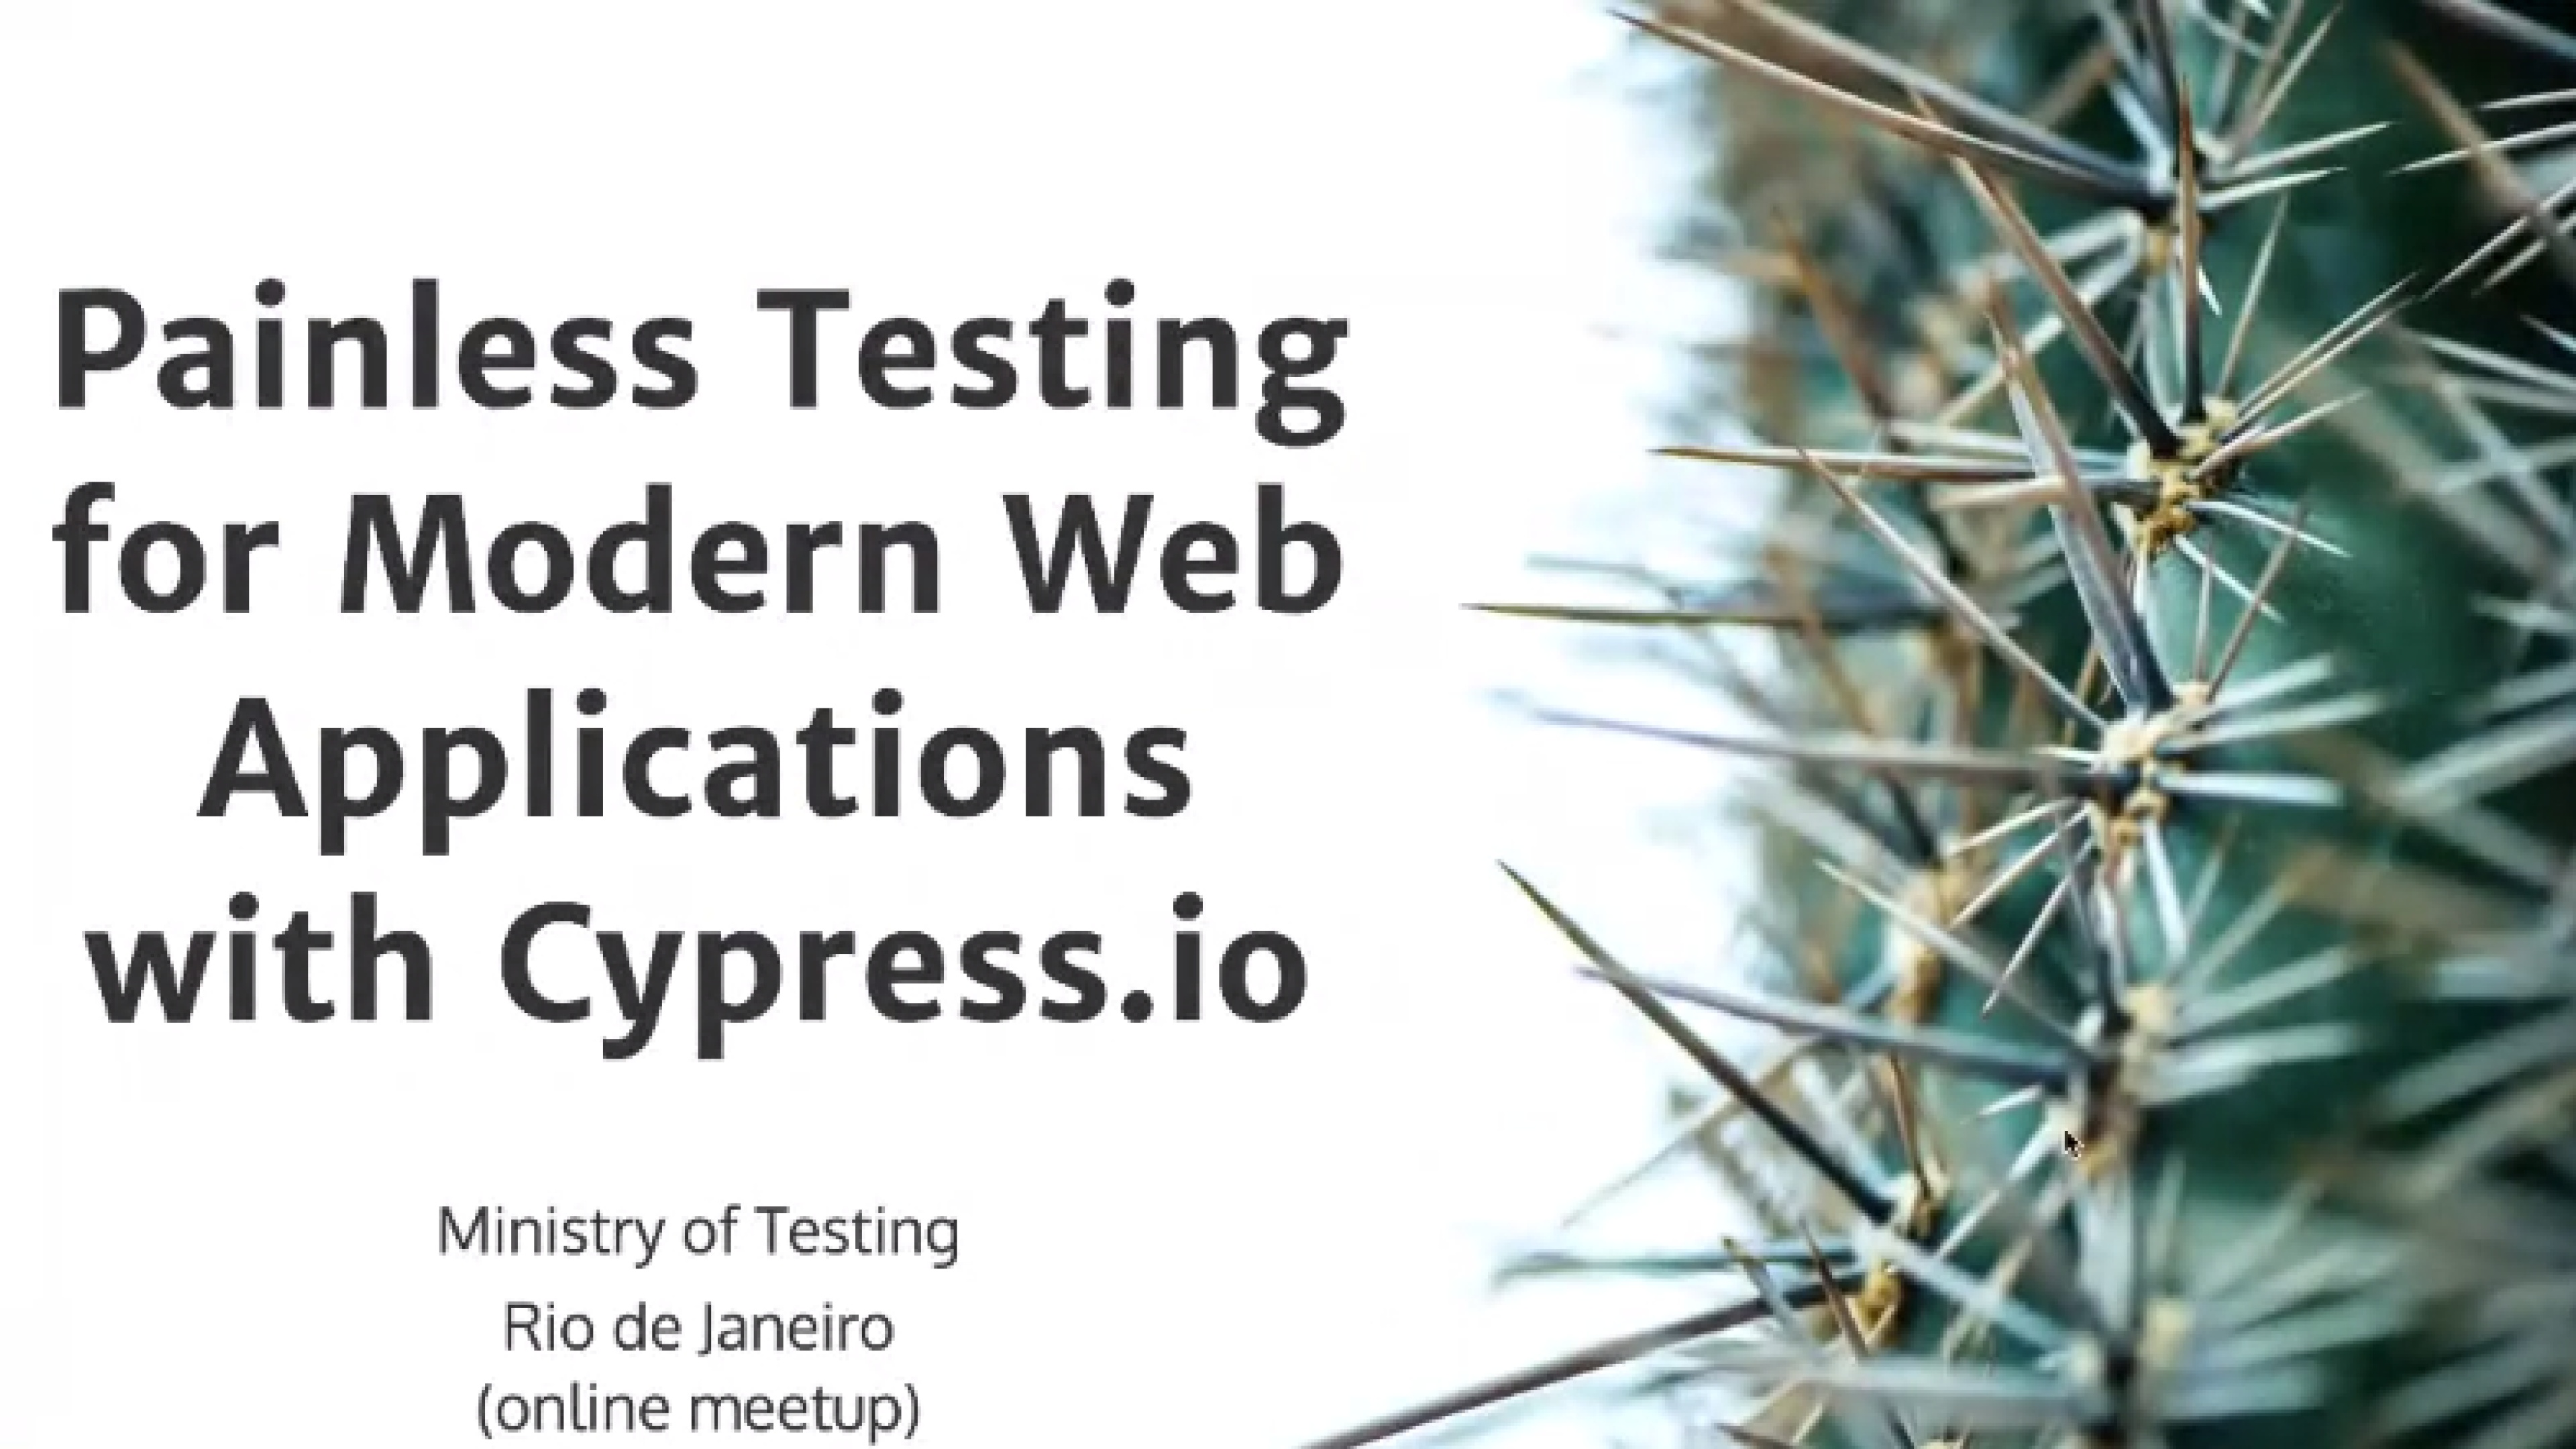 Painless Testing for Modern Web Applications with Cypress.io